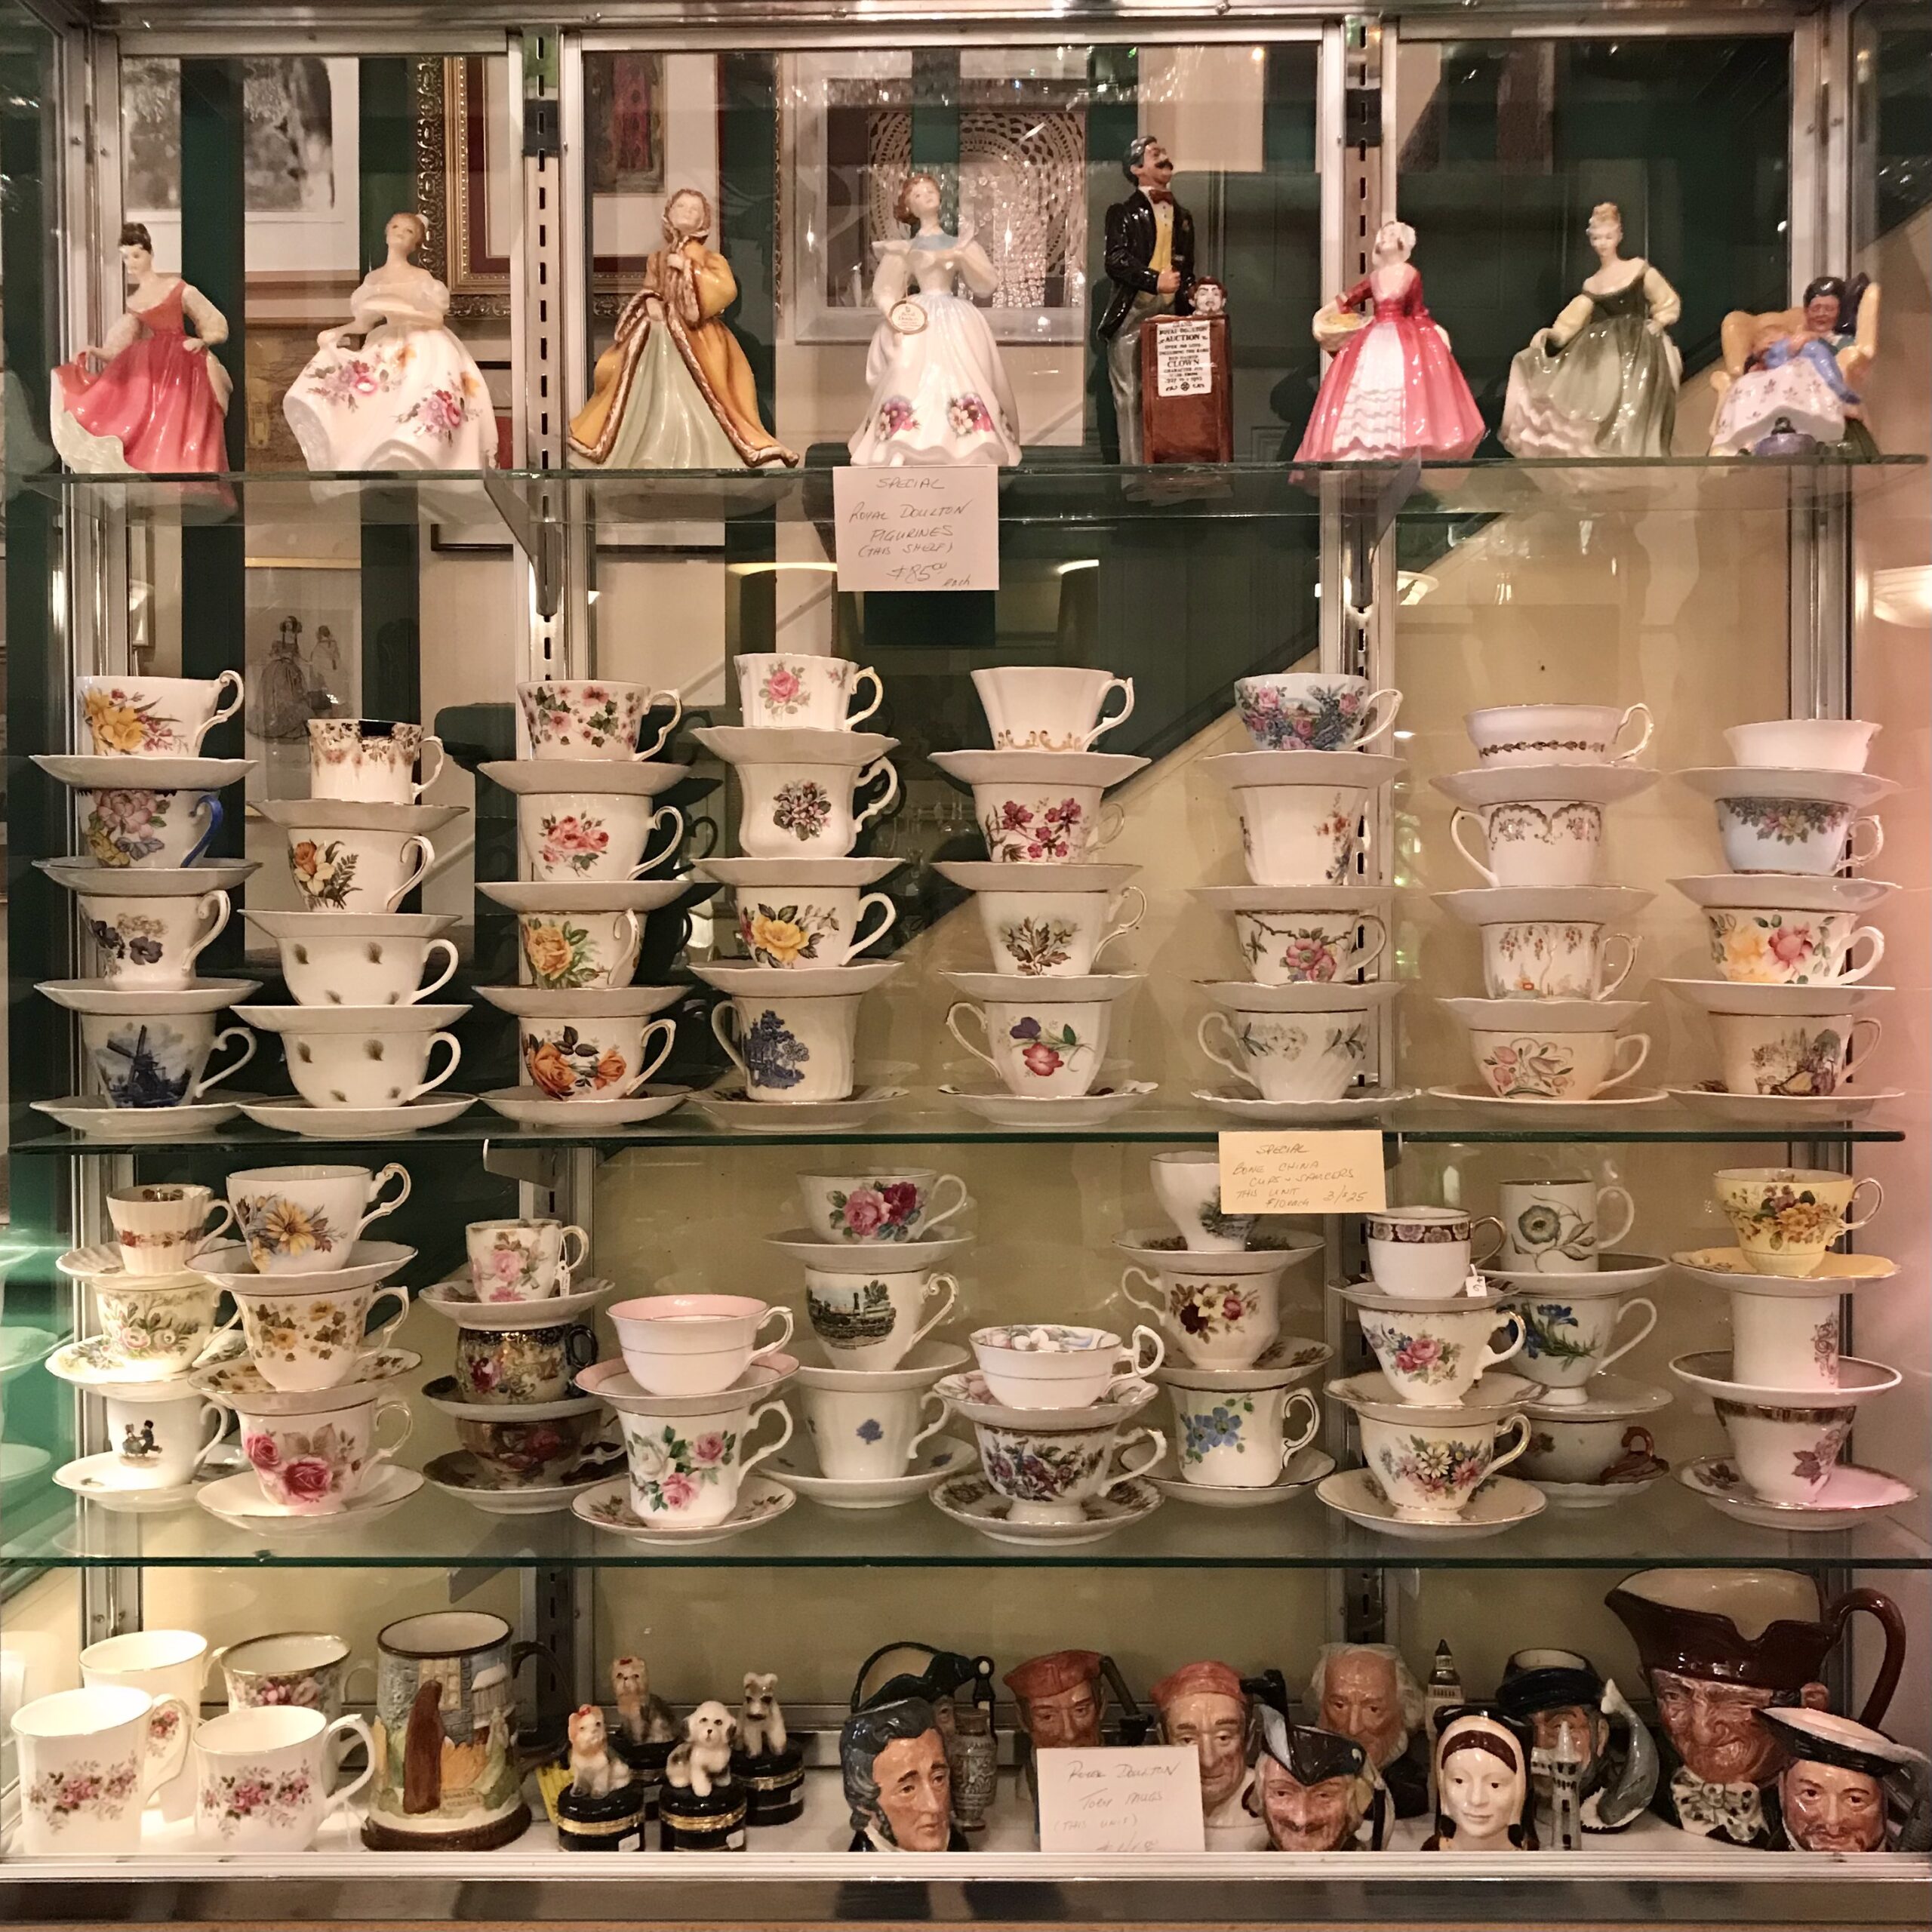 Four glass shelves holding Doulton figures at the top and cups and saucers on the lower shelves.